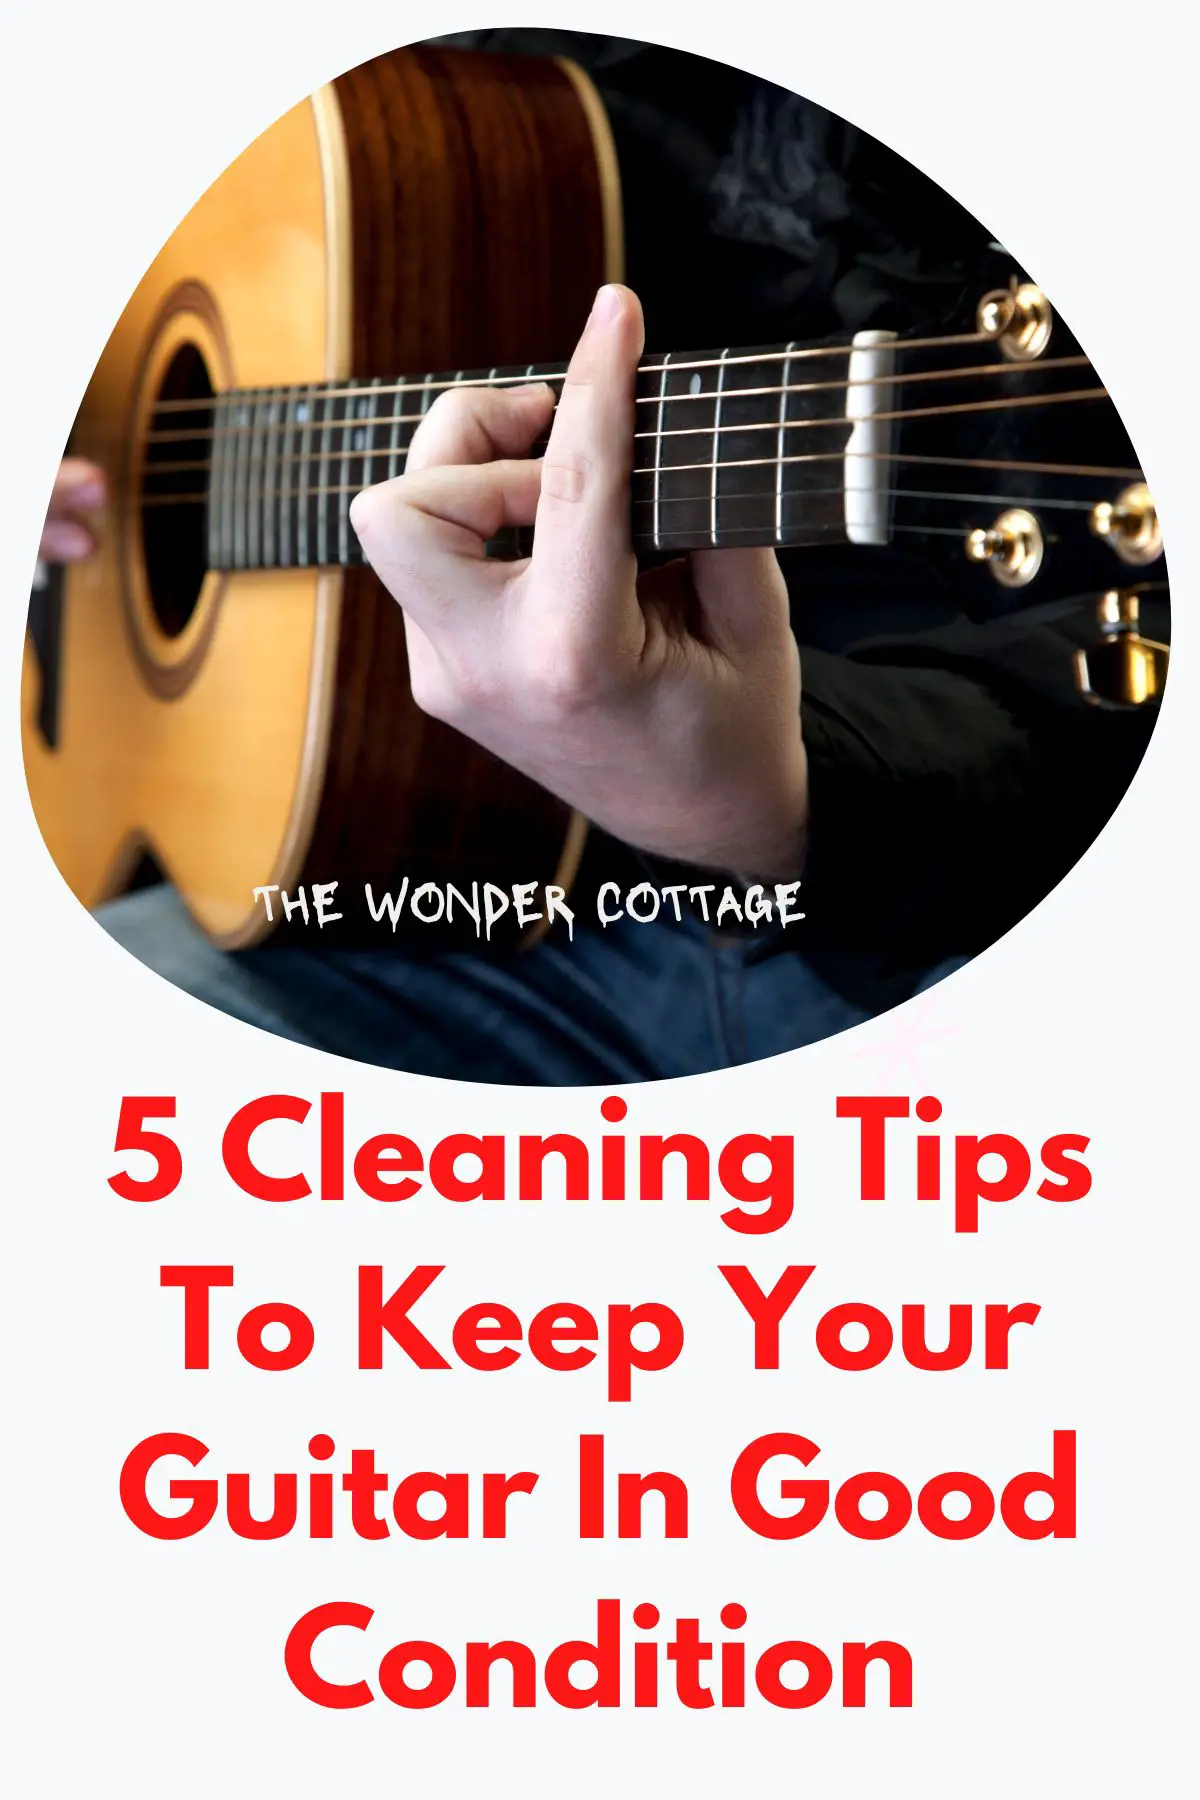 5 Cleaning Tips To Keep Your Guitar In Good Condition